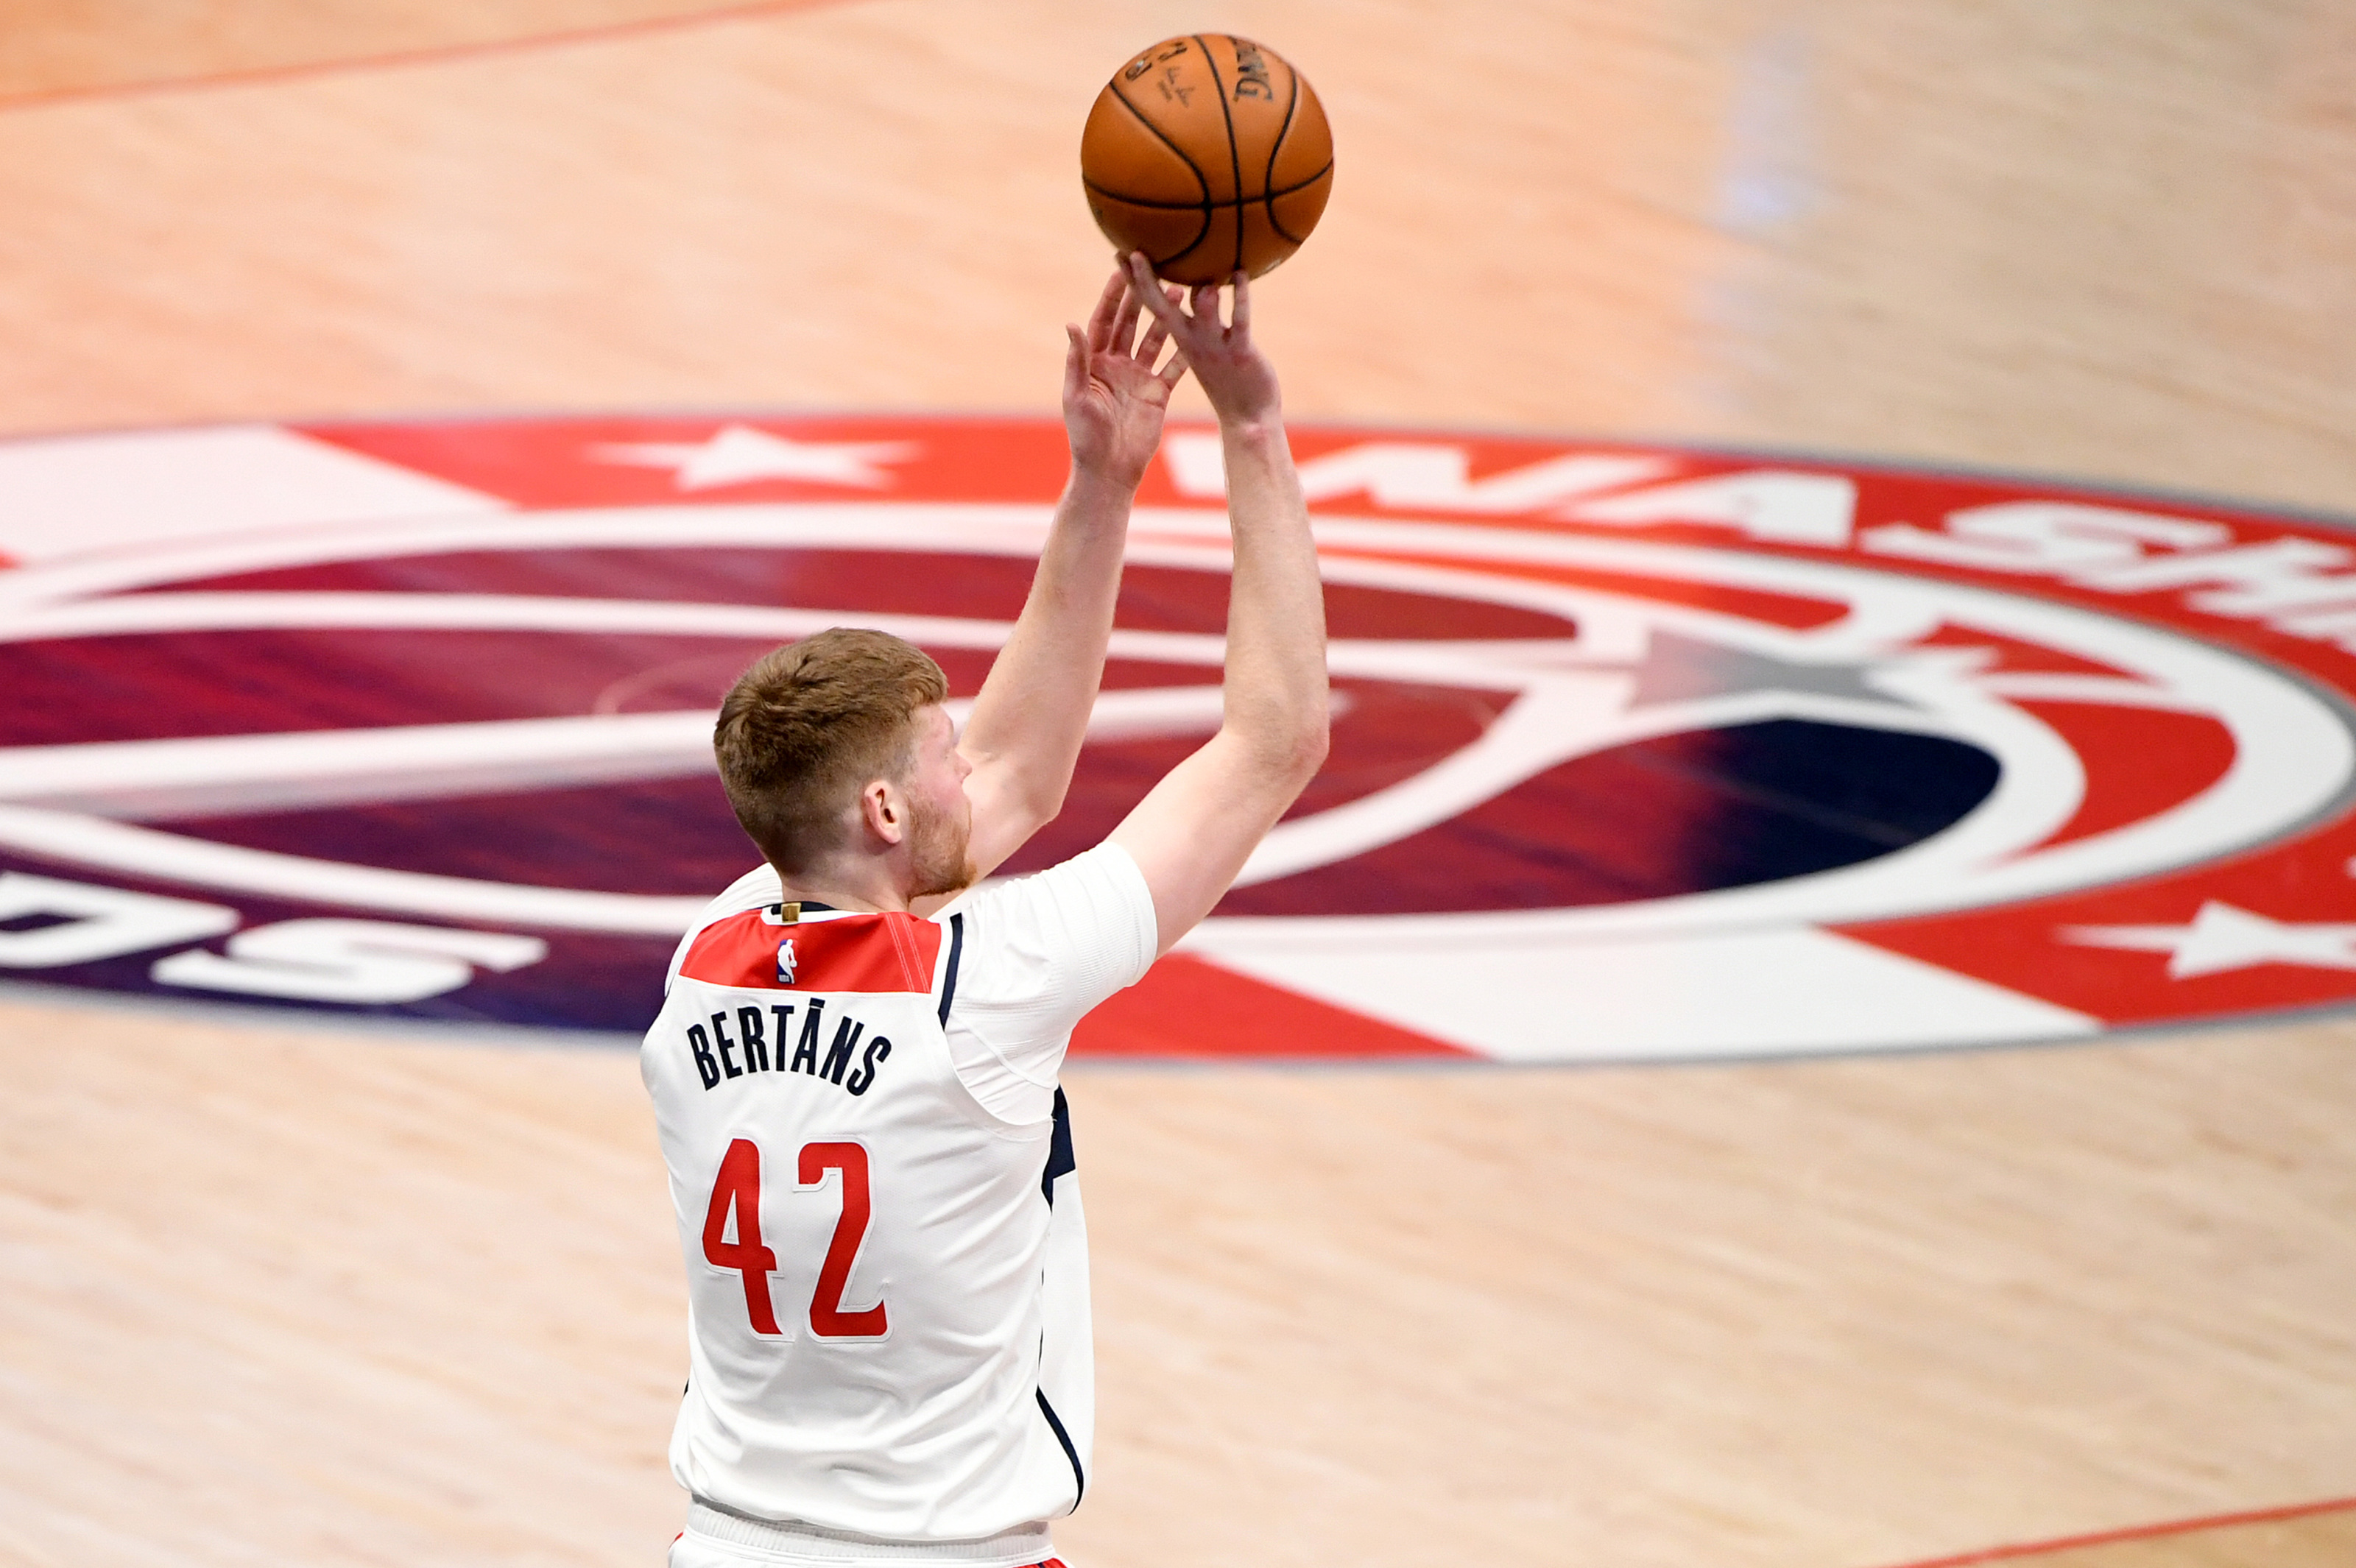 Davis Bertans' hot shooting streak brings sigh of relief for Wizards -  Washington Times